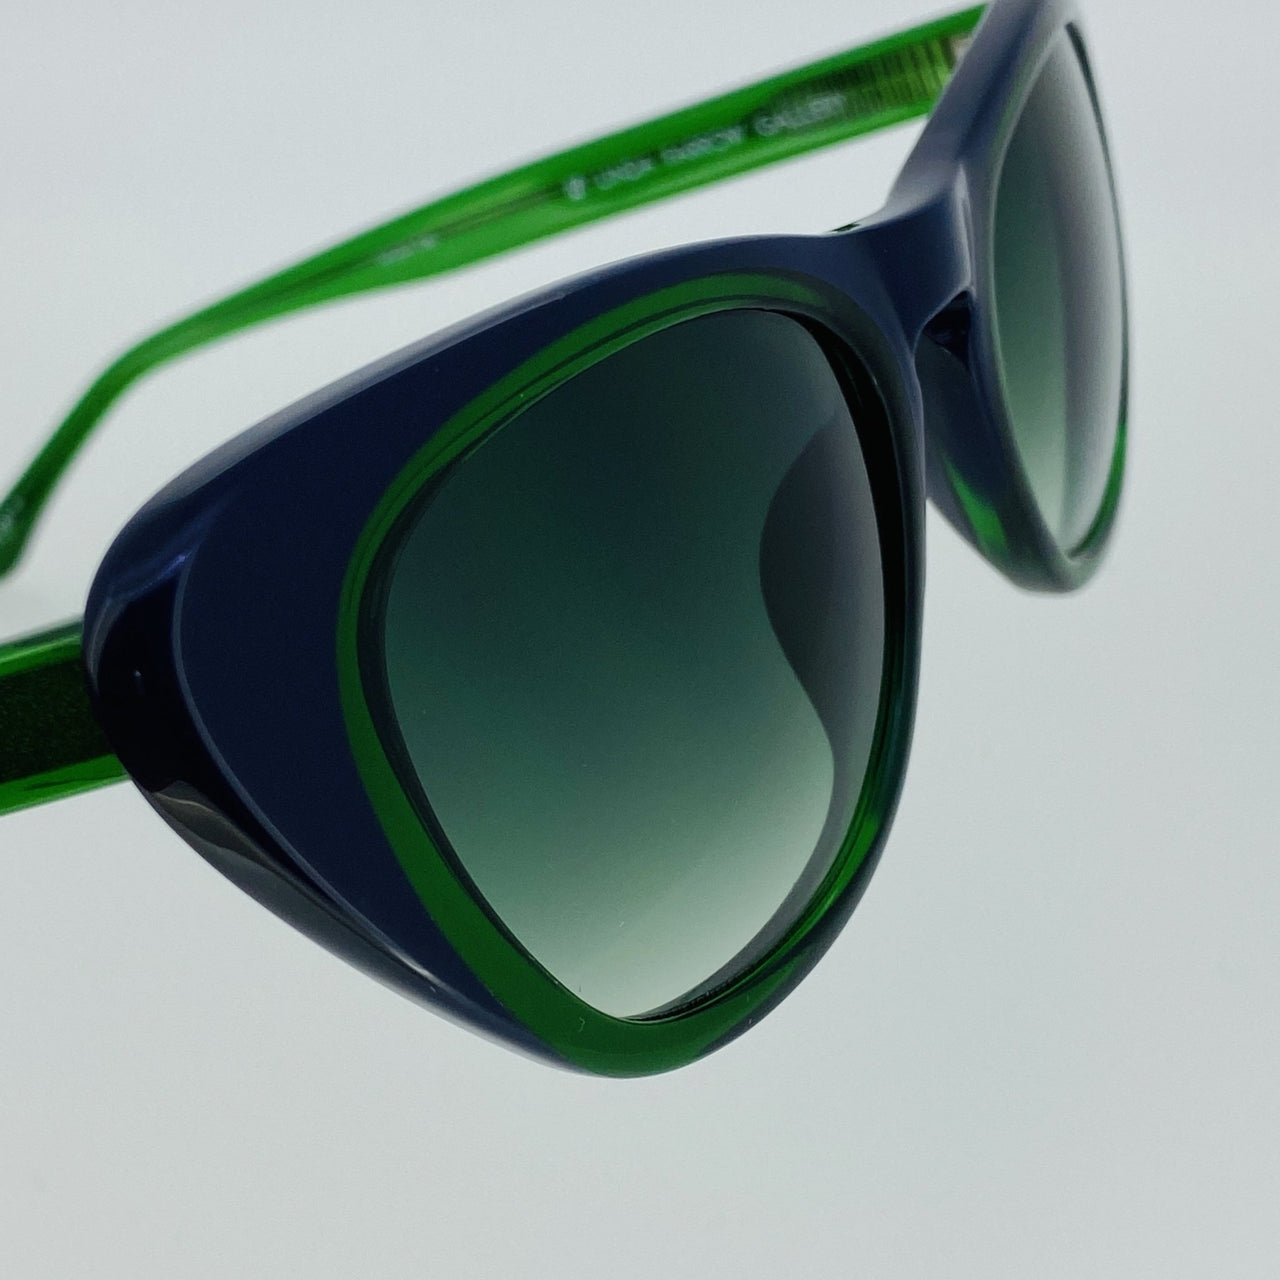 Erdem Women Sunglasses Cat Eye Navy Green with Green Gradient Lenses Category 3 EDM18C3SUN - Watches & Crystals